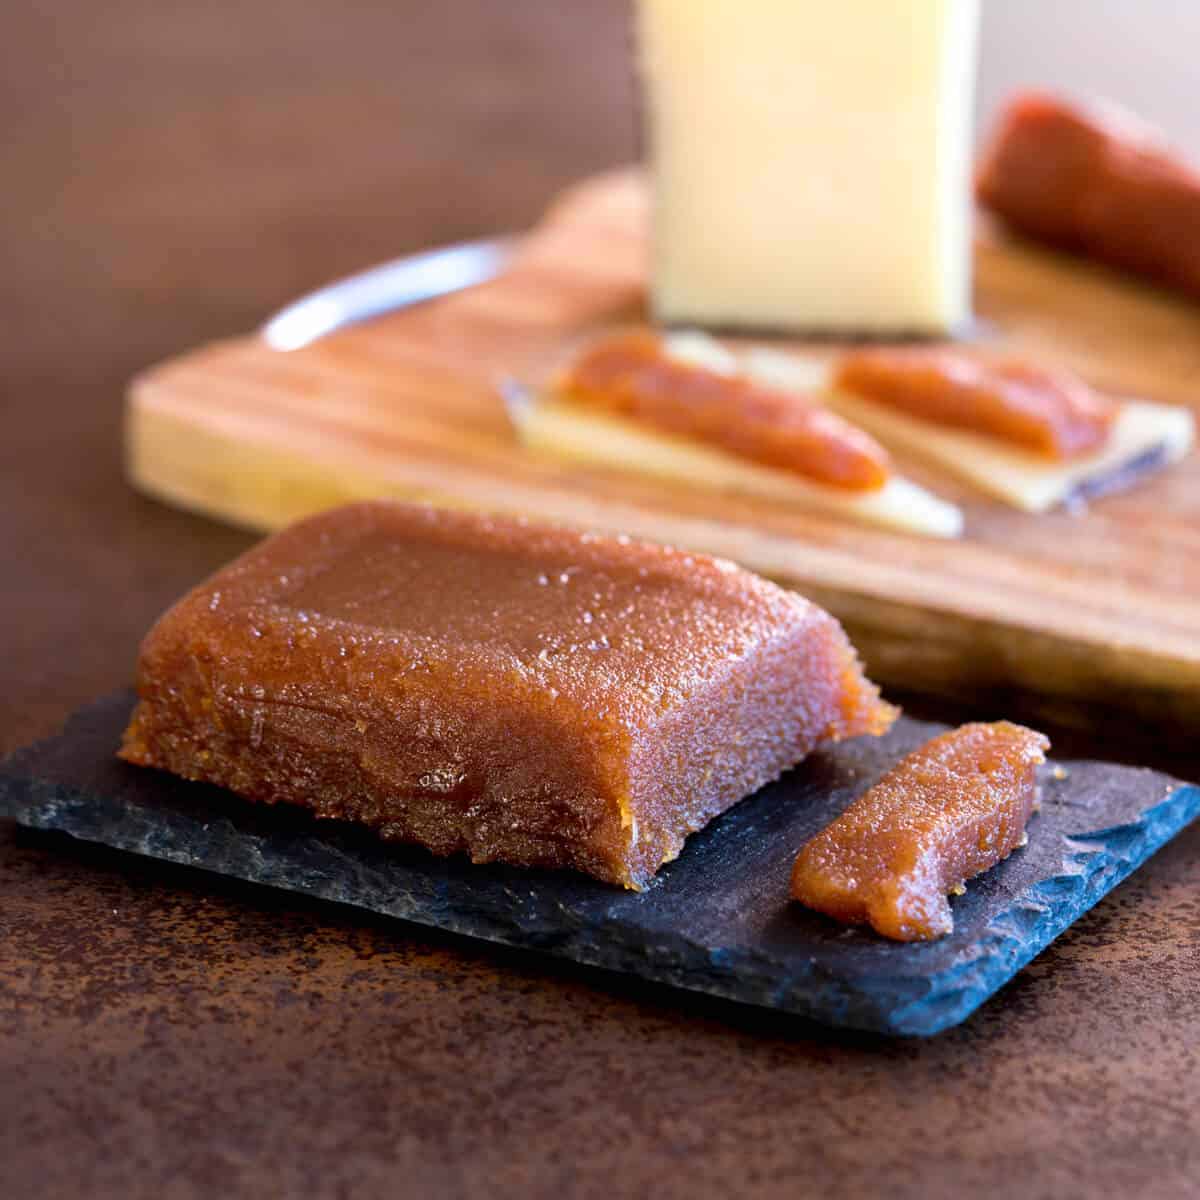 a homemade membrillo (quince paste) on a platter, in front of a cutting board with manchego cheese and chorizo sausage.